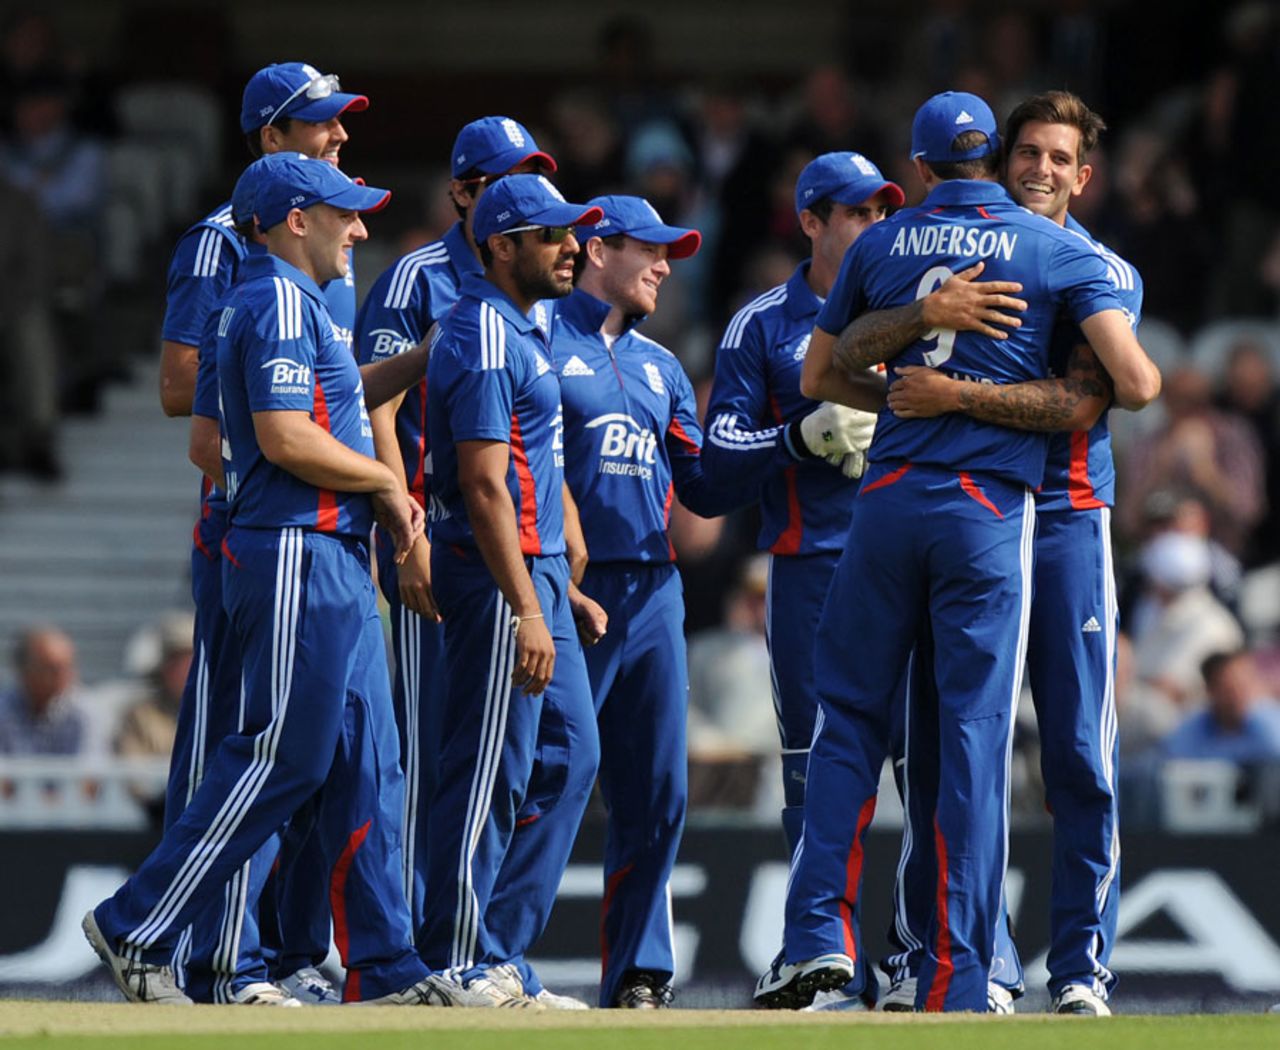 Jade Dernbach is congratulated by his team-mates, England v South Africa, 3rd NatWest ODI, The Oval, August 31, 2012